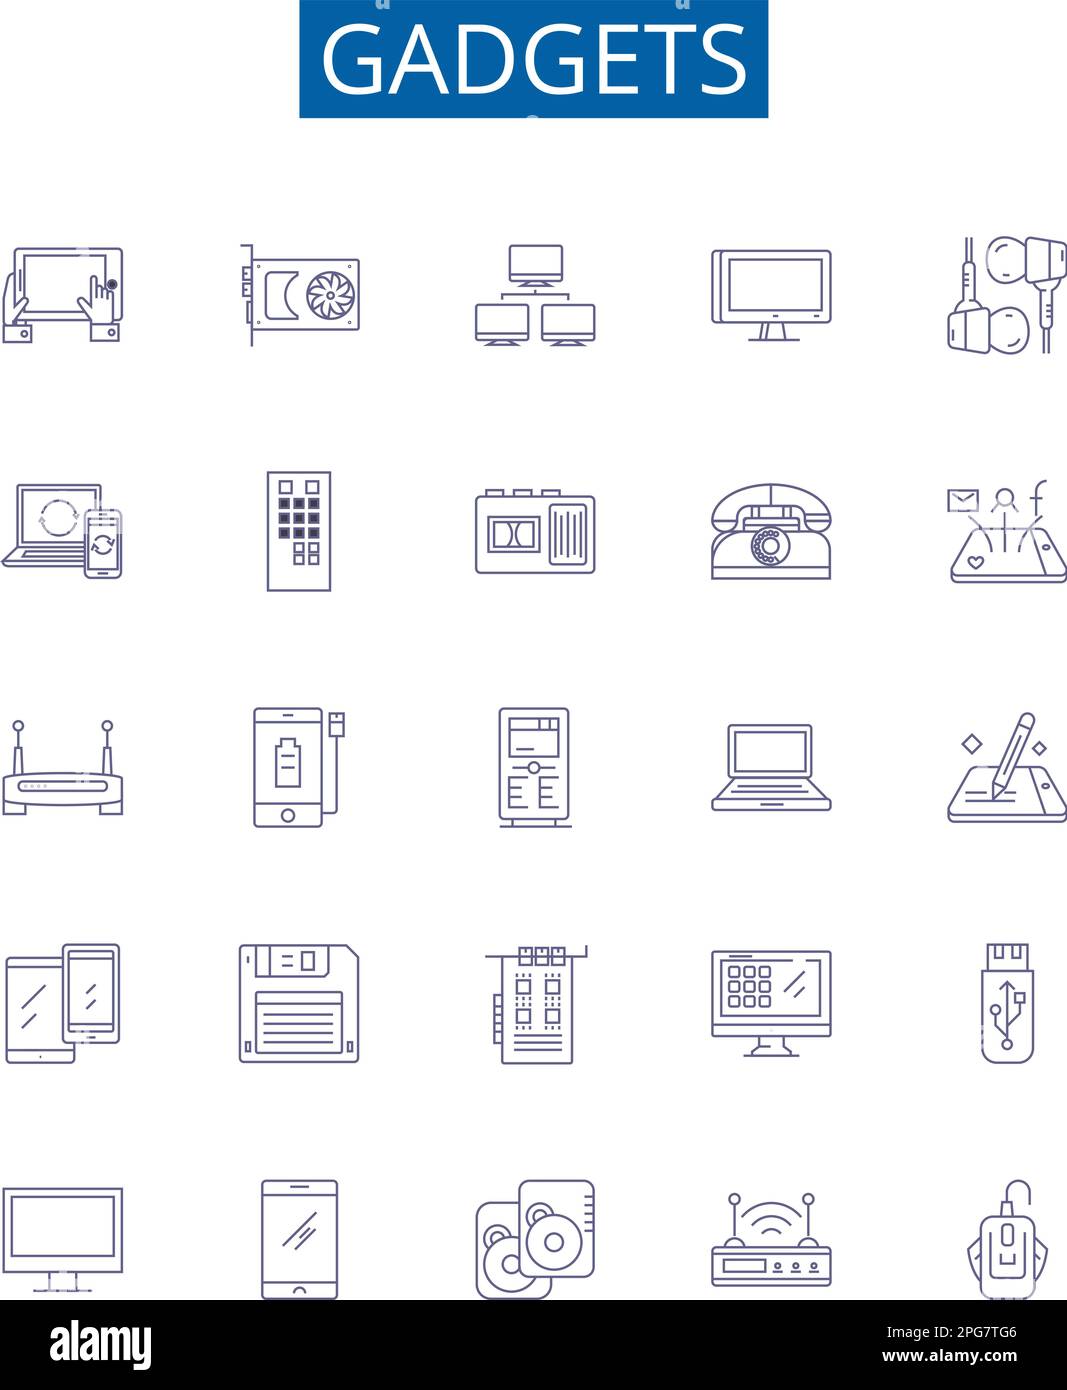 Gadgets line icons signs set. Design collection of devices, electronics, appliances, tools, technology, toys, iPhones, computers outline concept Stock Vector